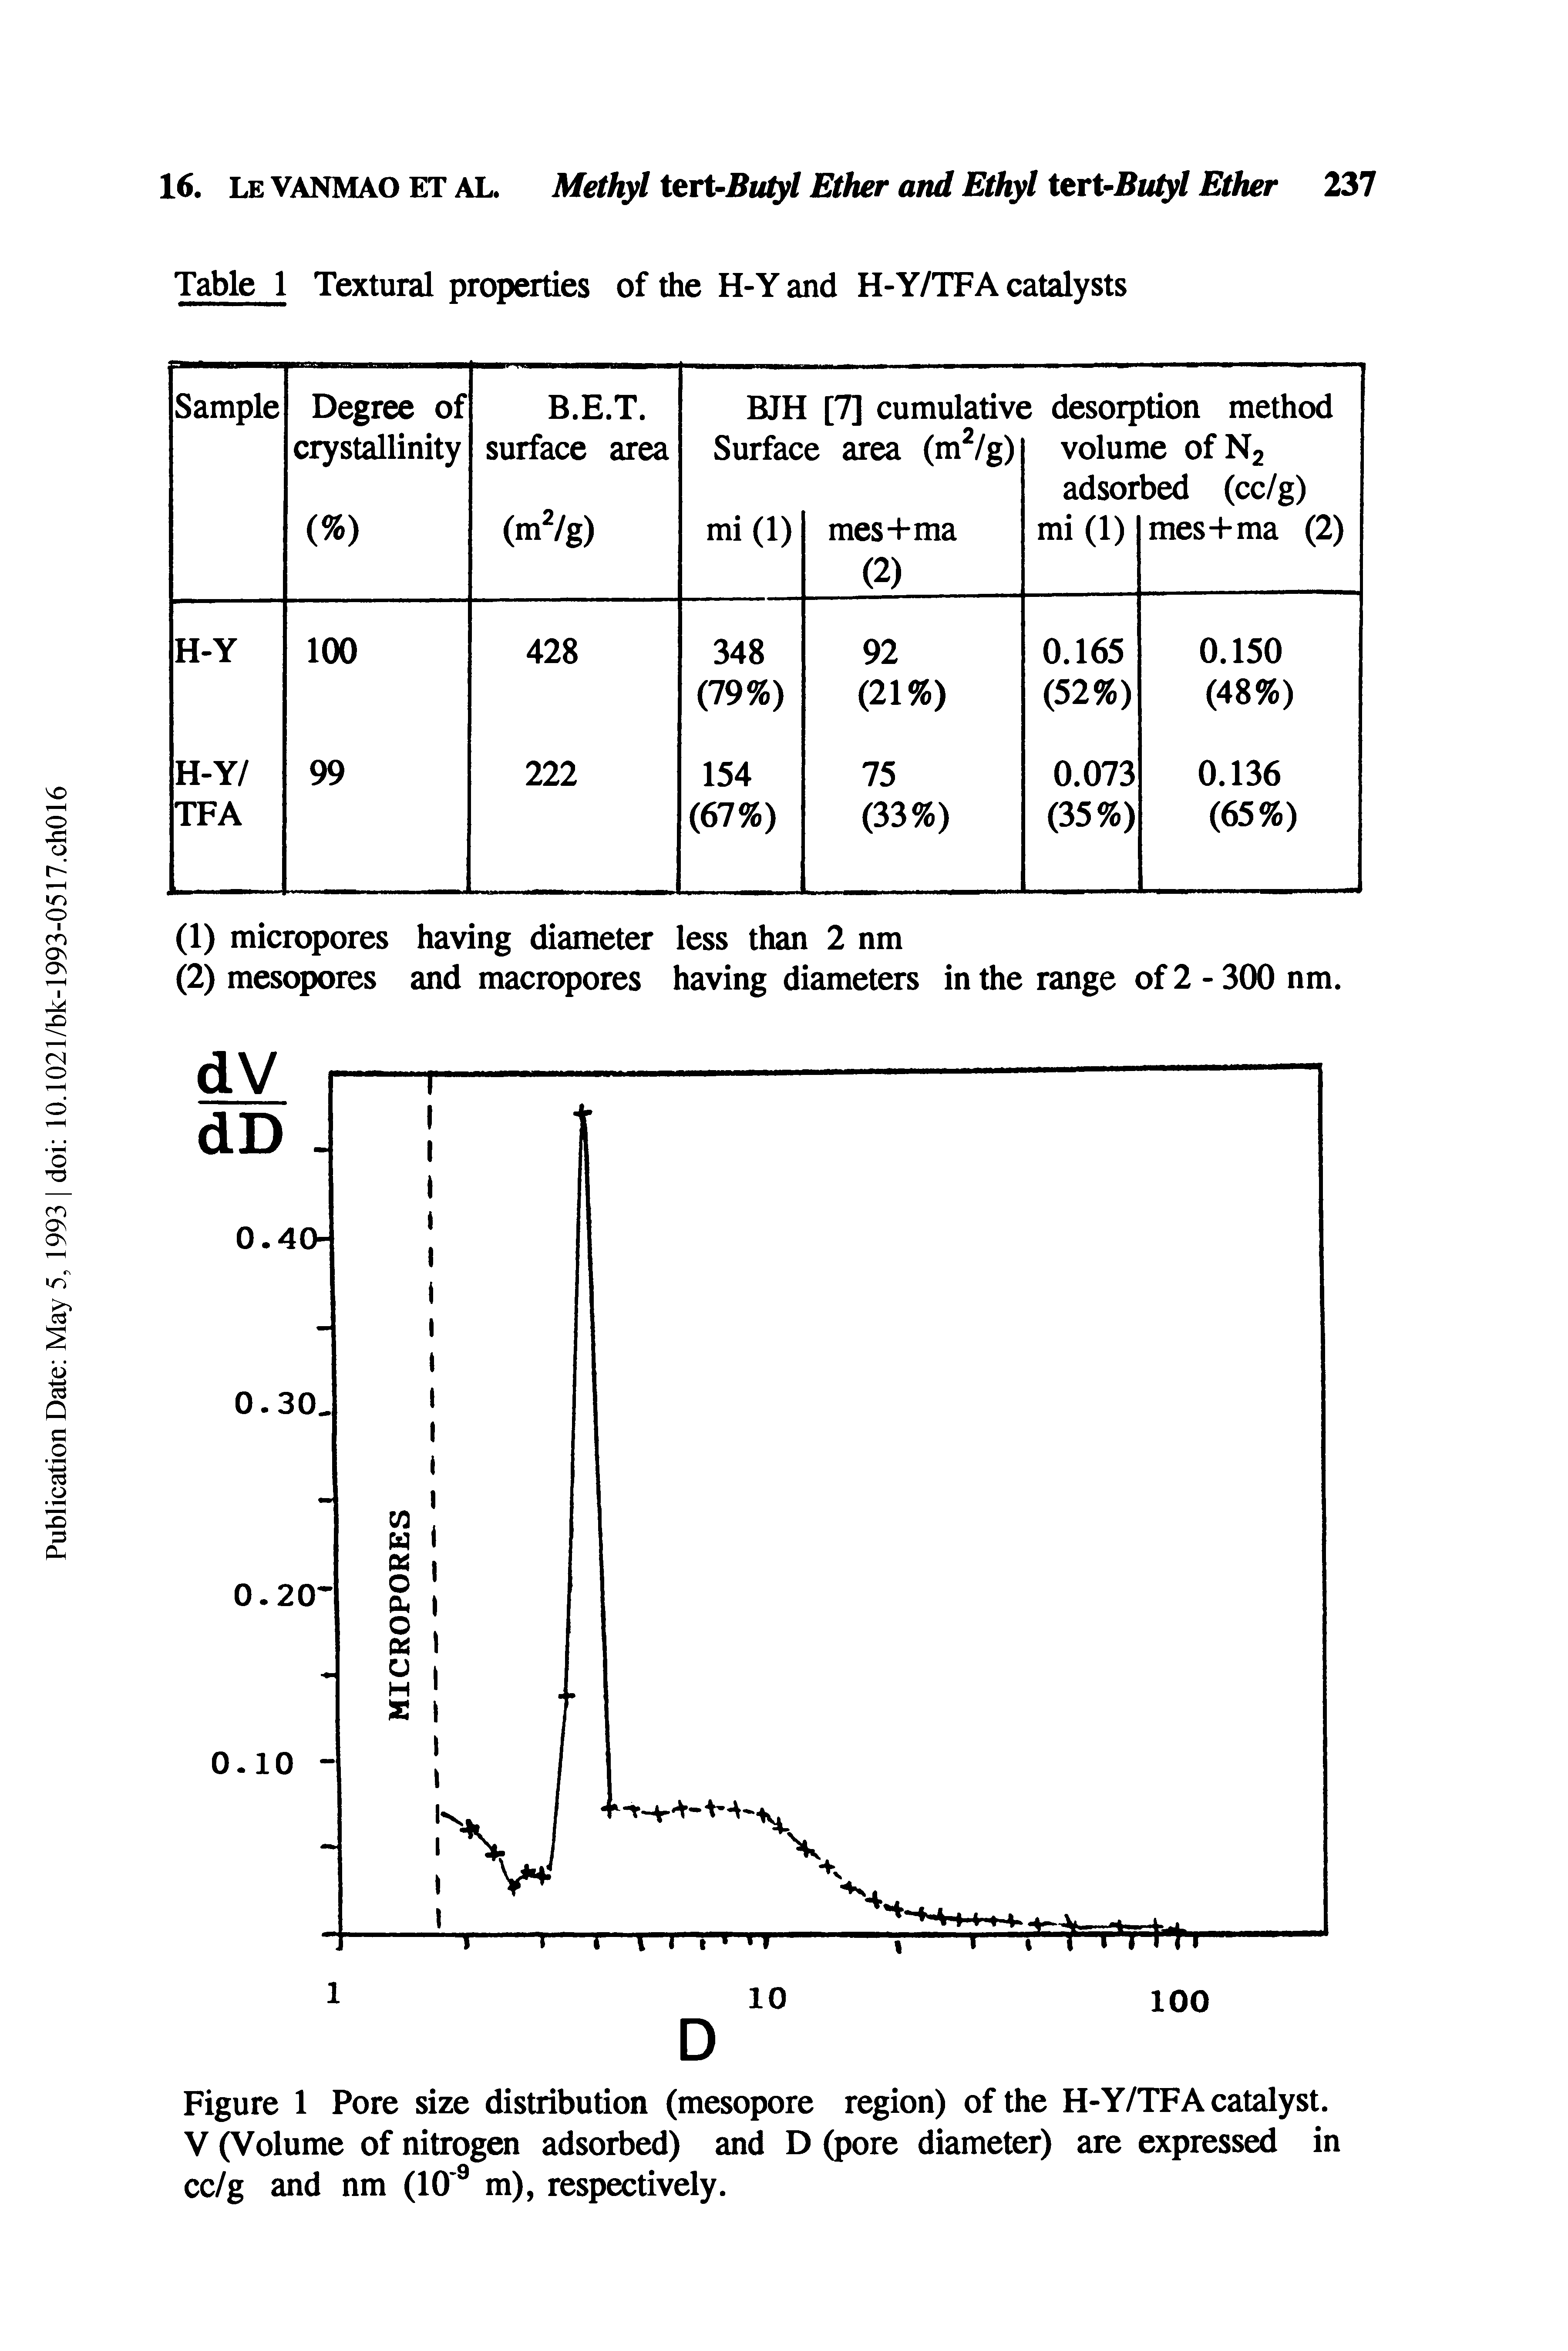 Figure 1 Pore size distribution (mesopore region) of the H-Y/TFA catalyst. V (Volume of nitrogen adsorbed) and D (pore diameter) are expressed in cc/g and nm (10 9 m), respectively.